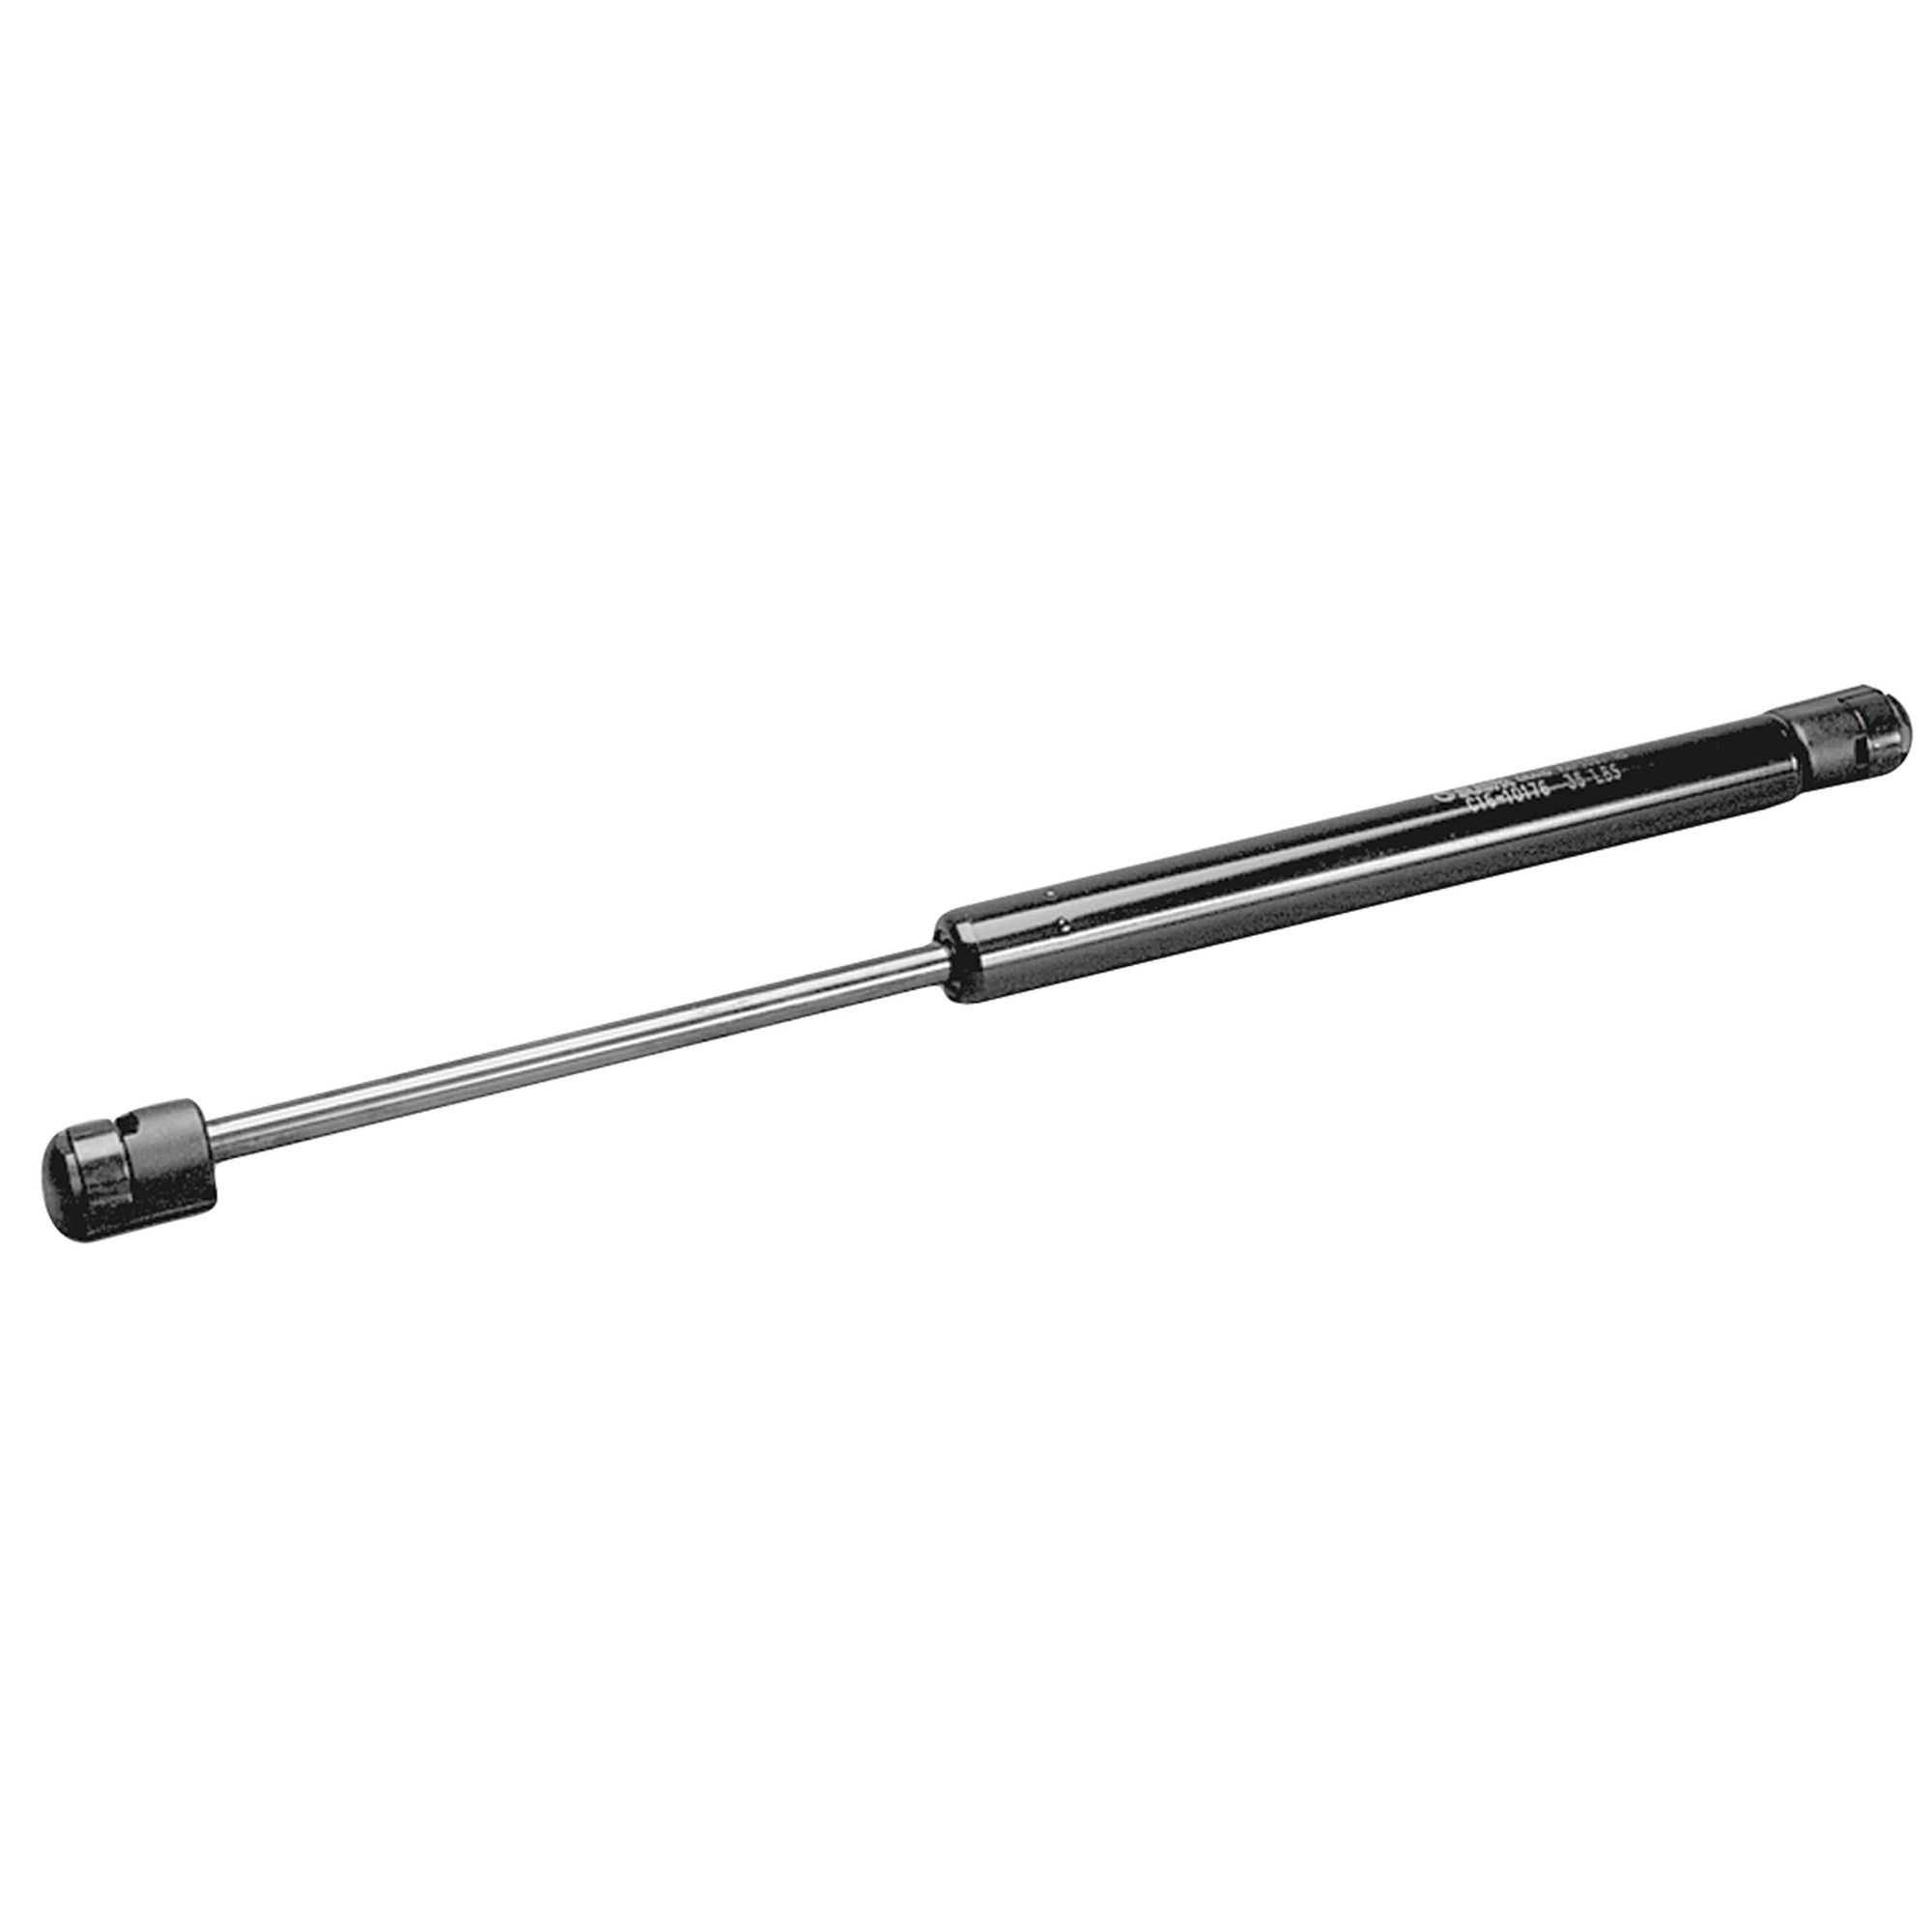 AP Products 010-158 Gas Spring - 26.34" Ext Length, 10.24" Stroke Rod Length, 150 lb. P1 Force